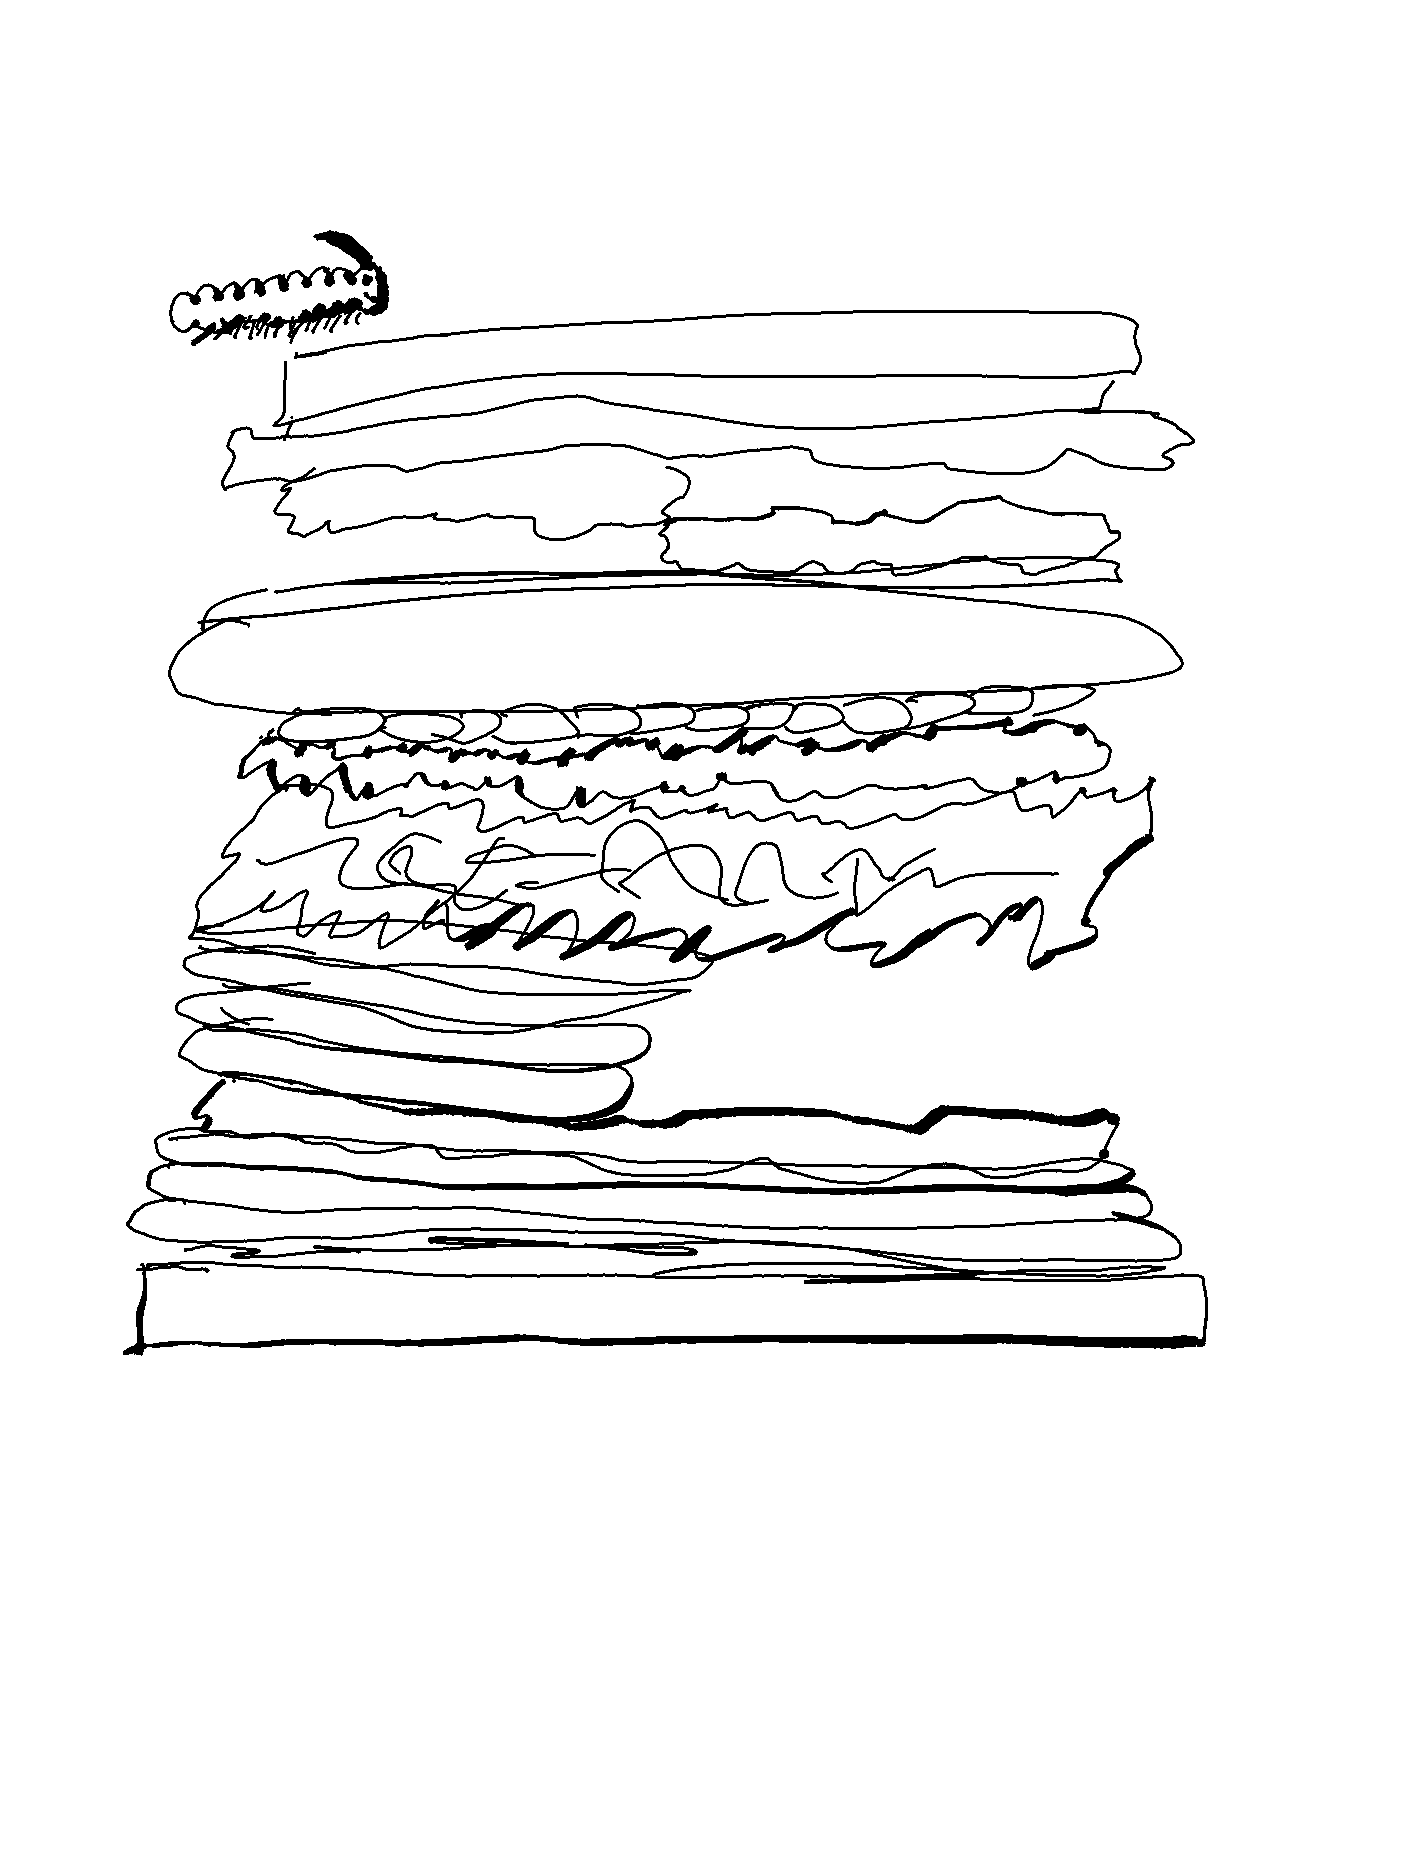 Drawing of a caterpillar atop a giant stacked sandwich with ingredients that go across the whole sandwich, and some that are on half only.